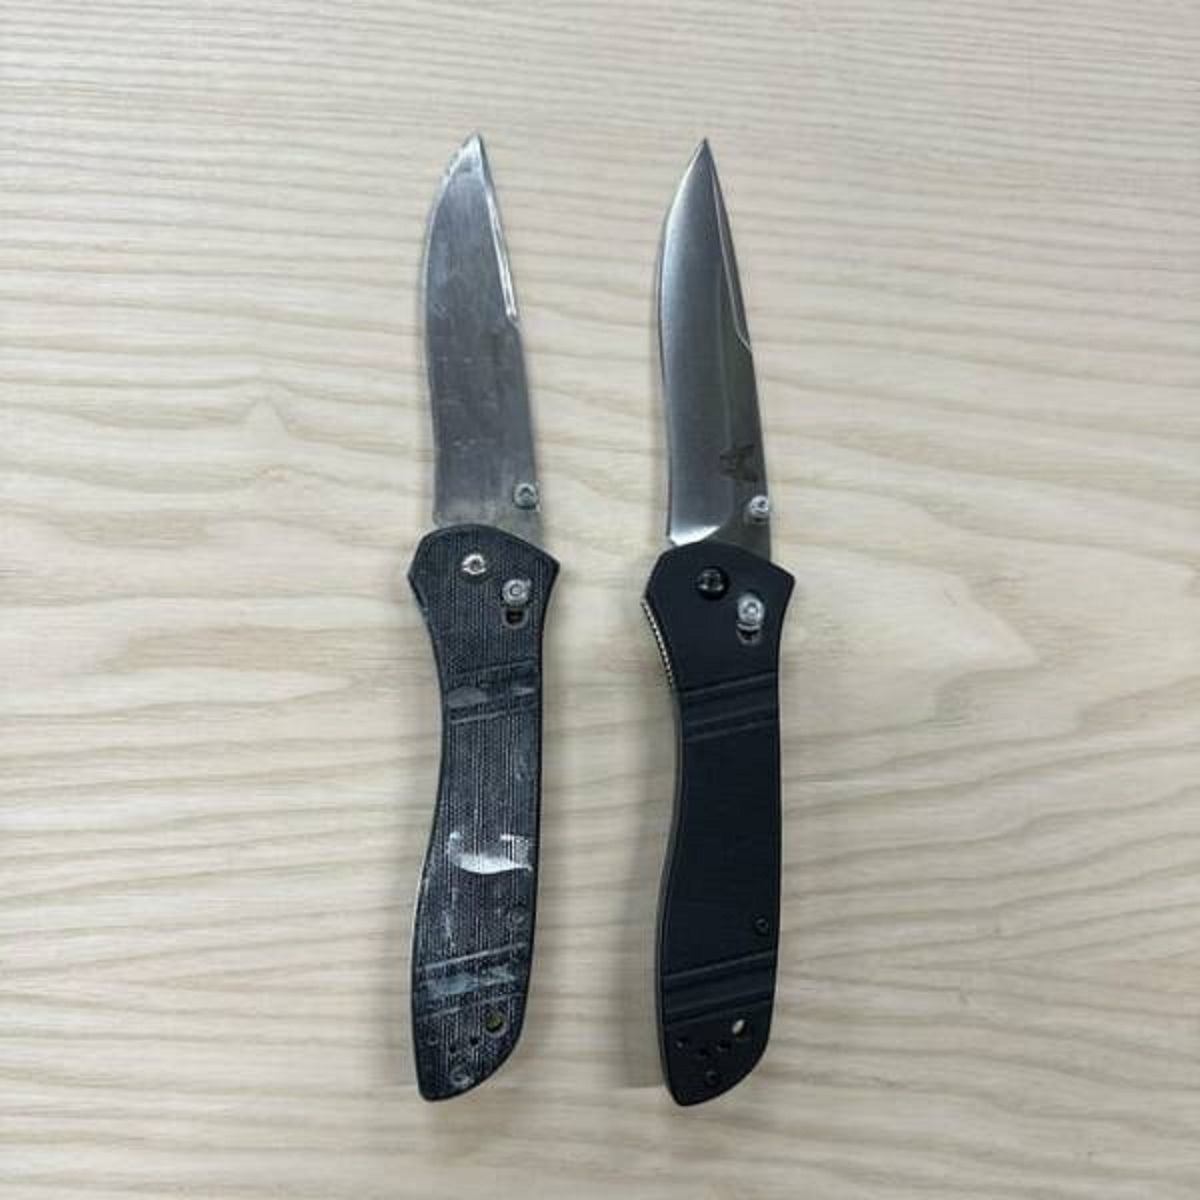 "A knife I’ve carried for 20 years next to a brand new example."